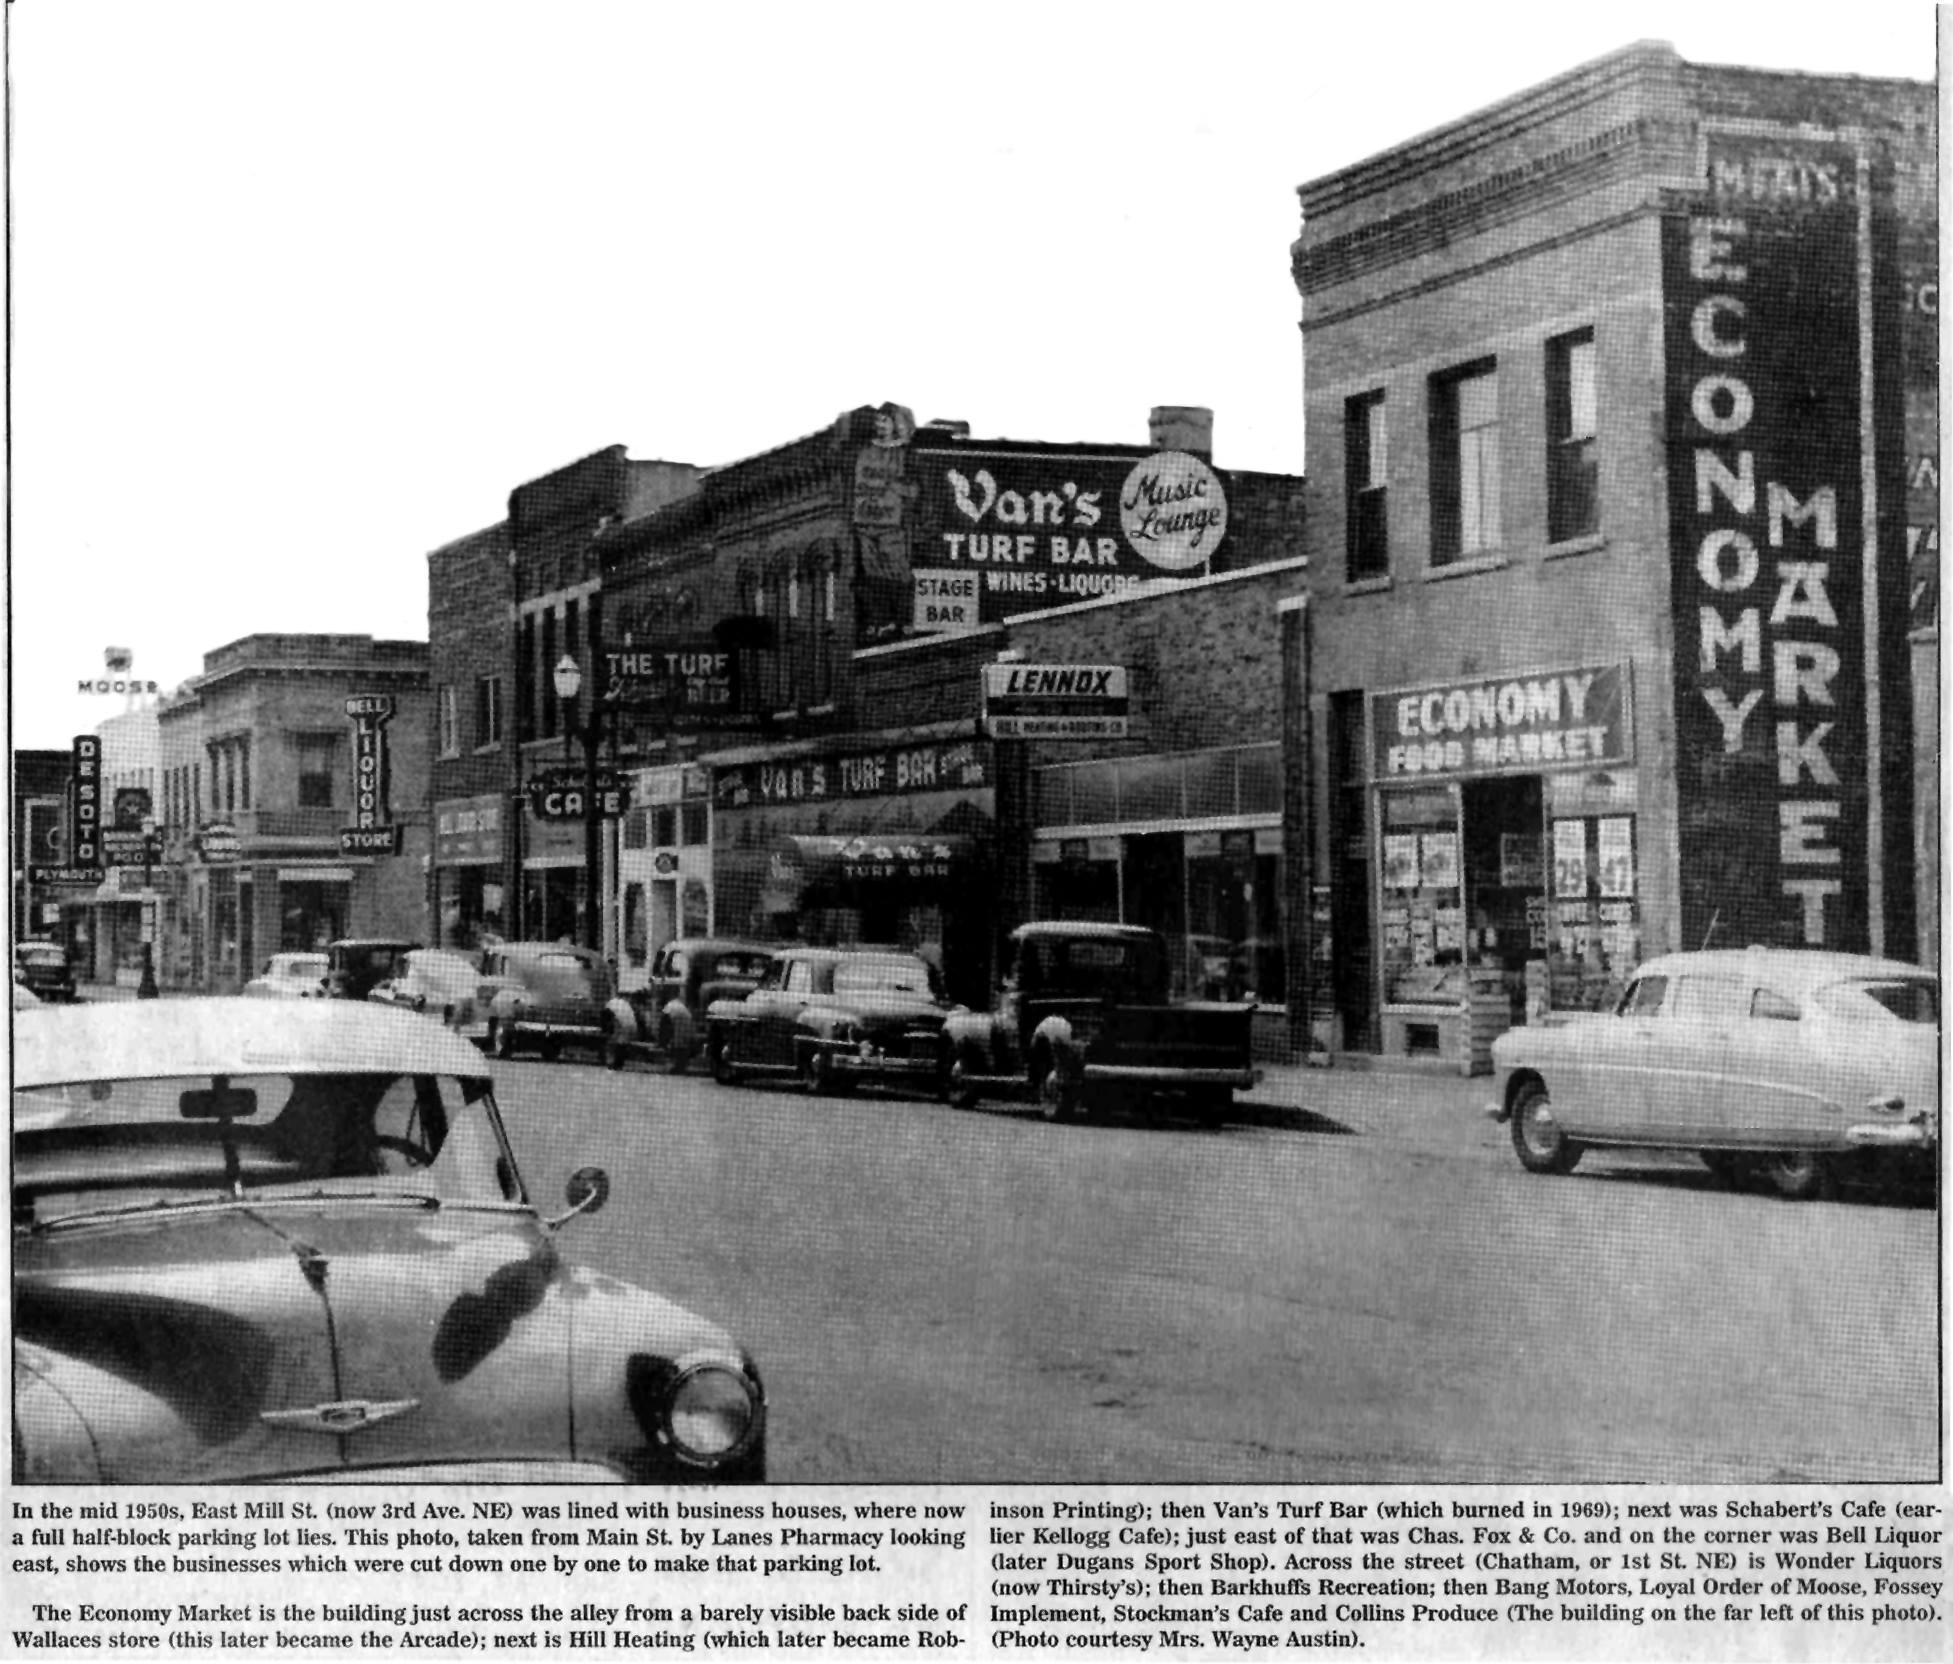 E. Mill St. (3rd Ave. N.E.) - 1950's (looking towards the SE from N. Main St.)